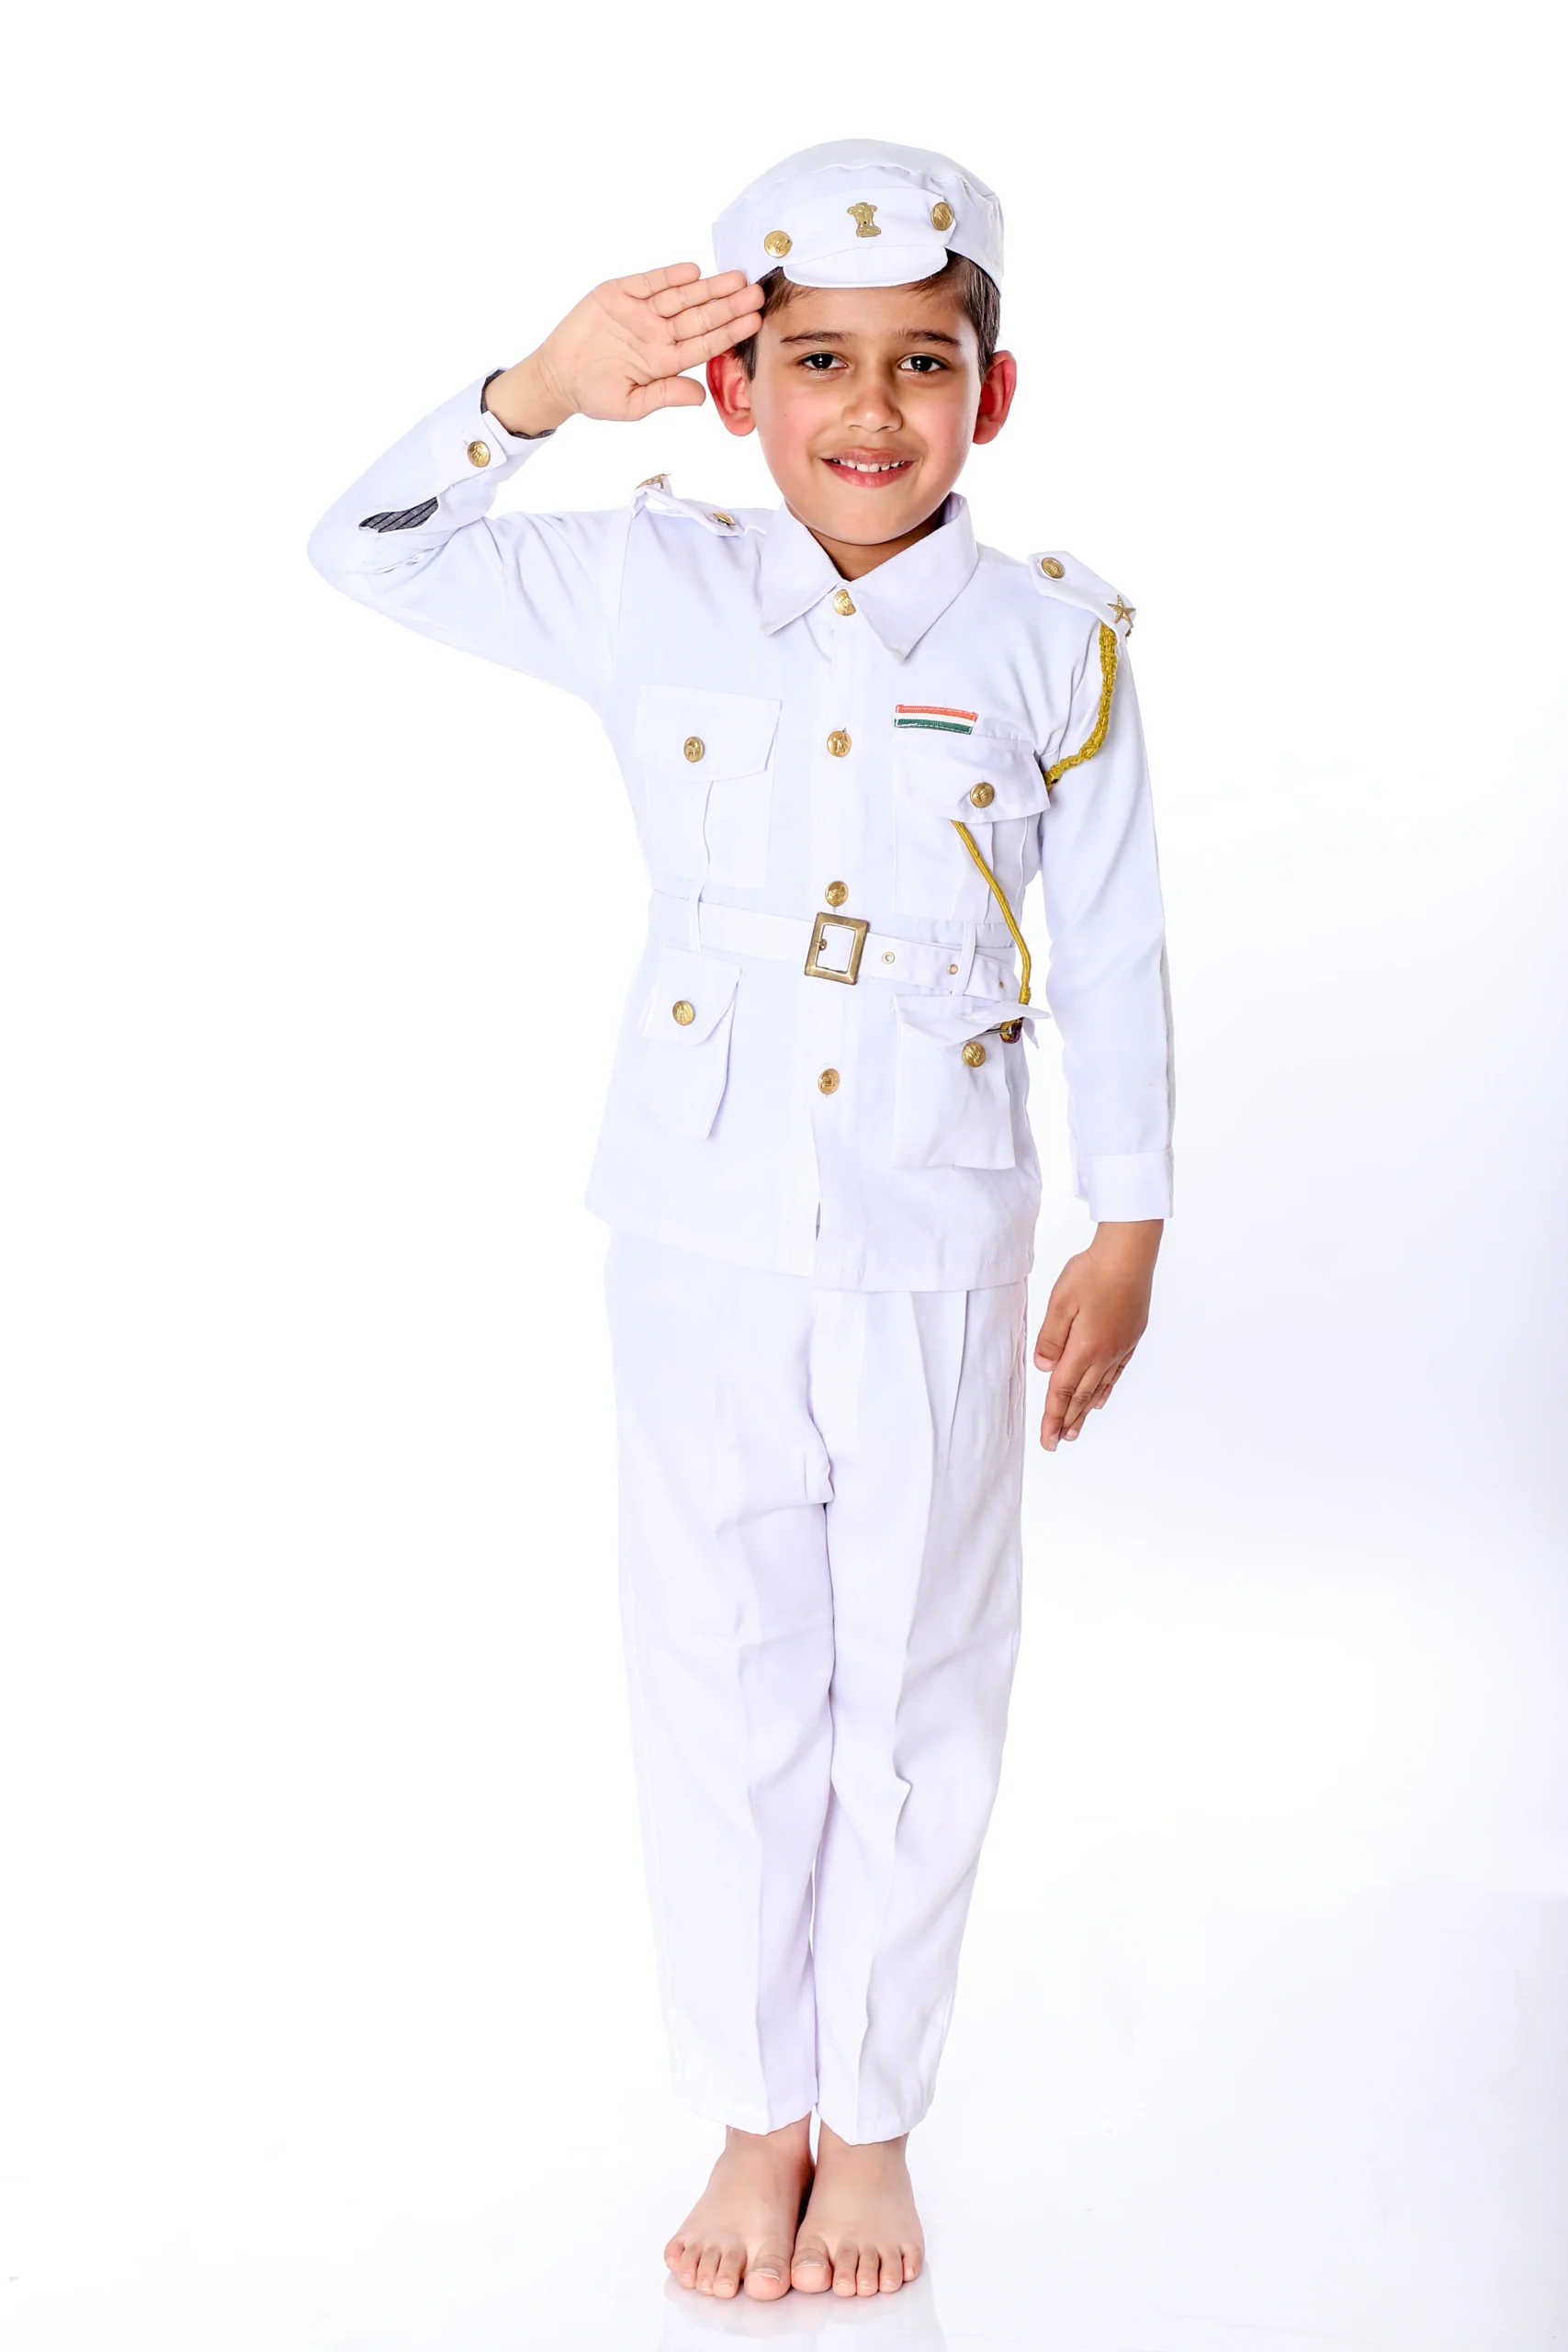 Children's Day 2020: Creative Fancy Dress Costume Ideas For This Day In  India - Boldsky.com